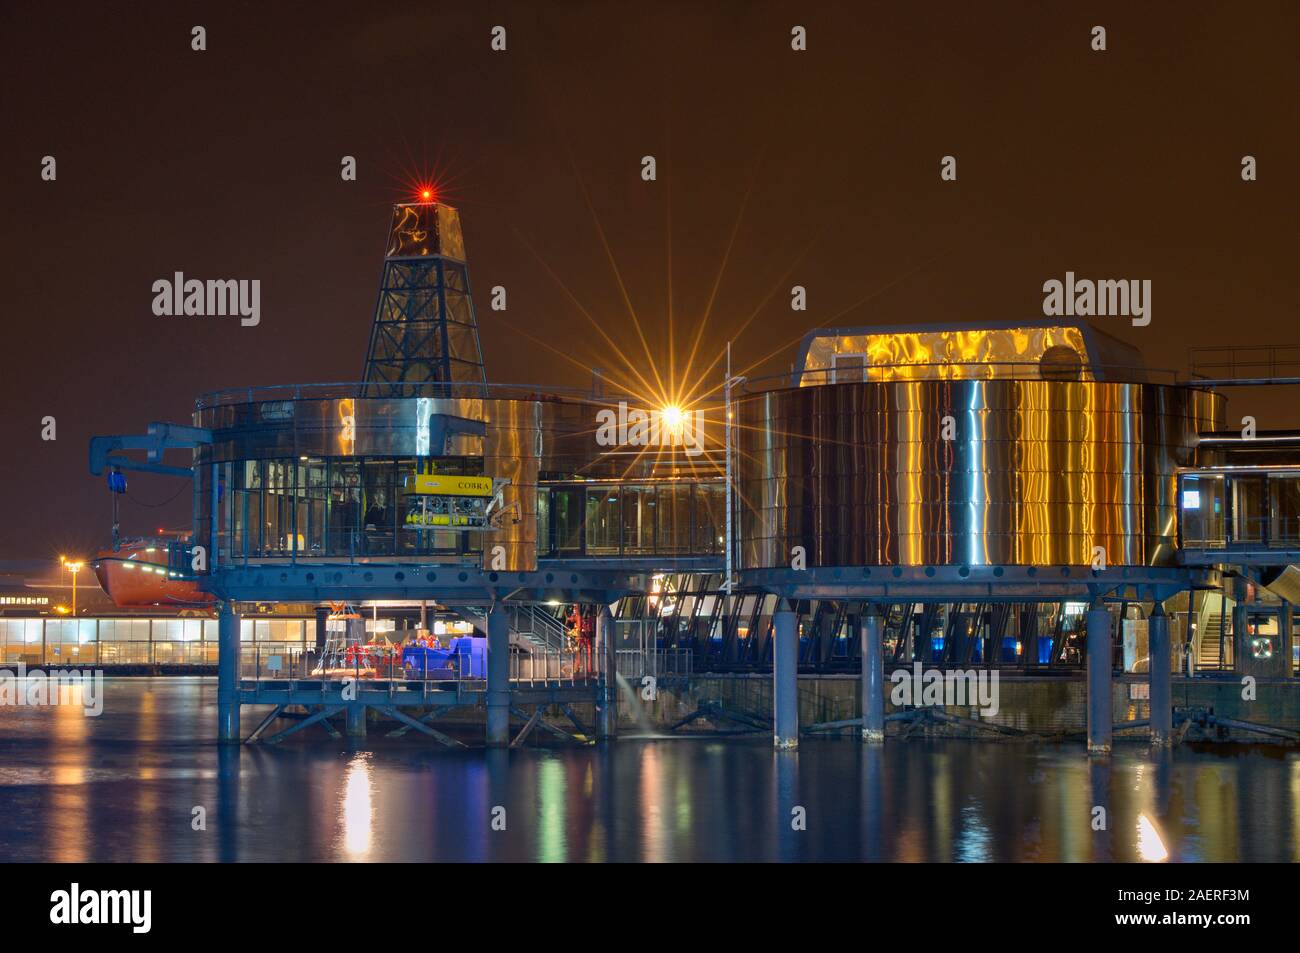 Oil Museum built in the style of an oil rig, night scene, Stavanger, Rogaland, Norway Stock Photo